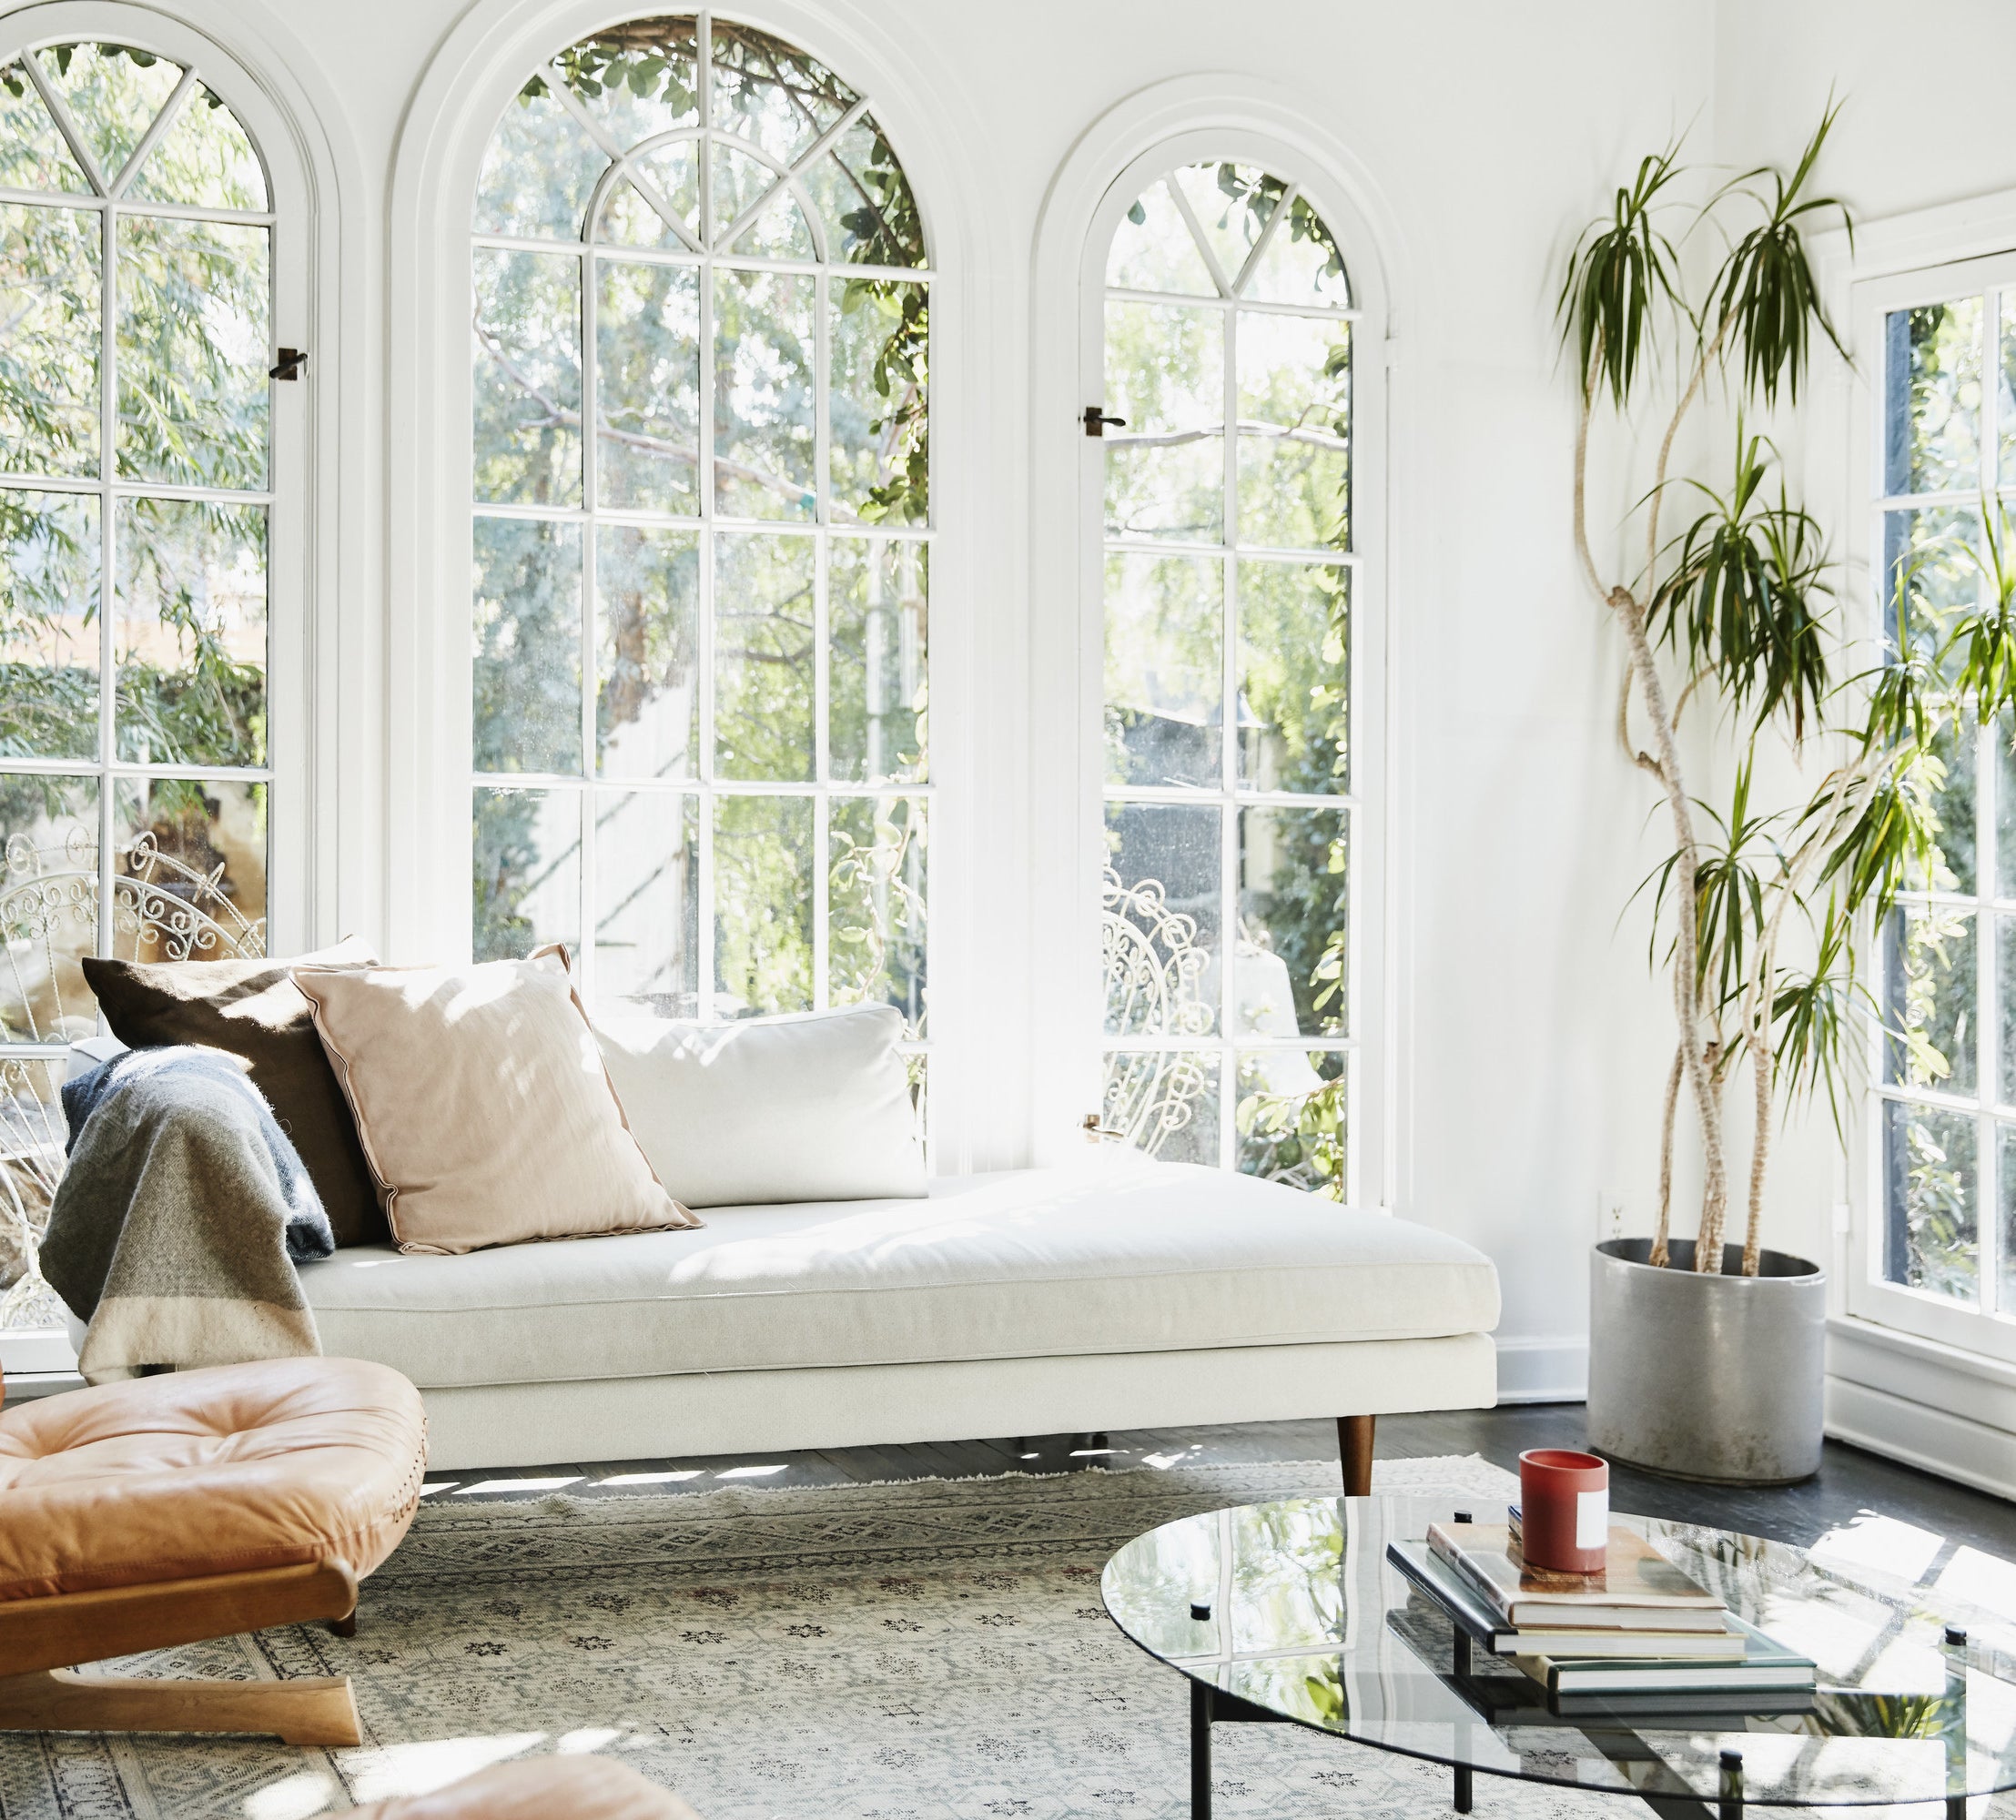 Bright living room with large, curved windows